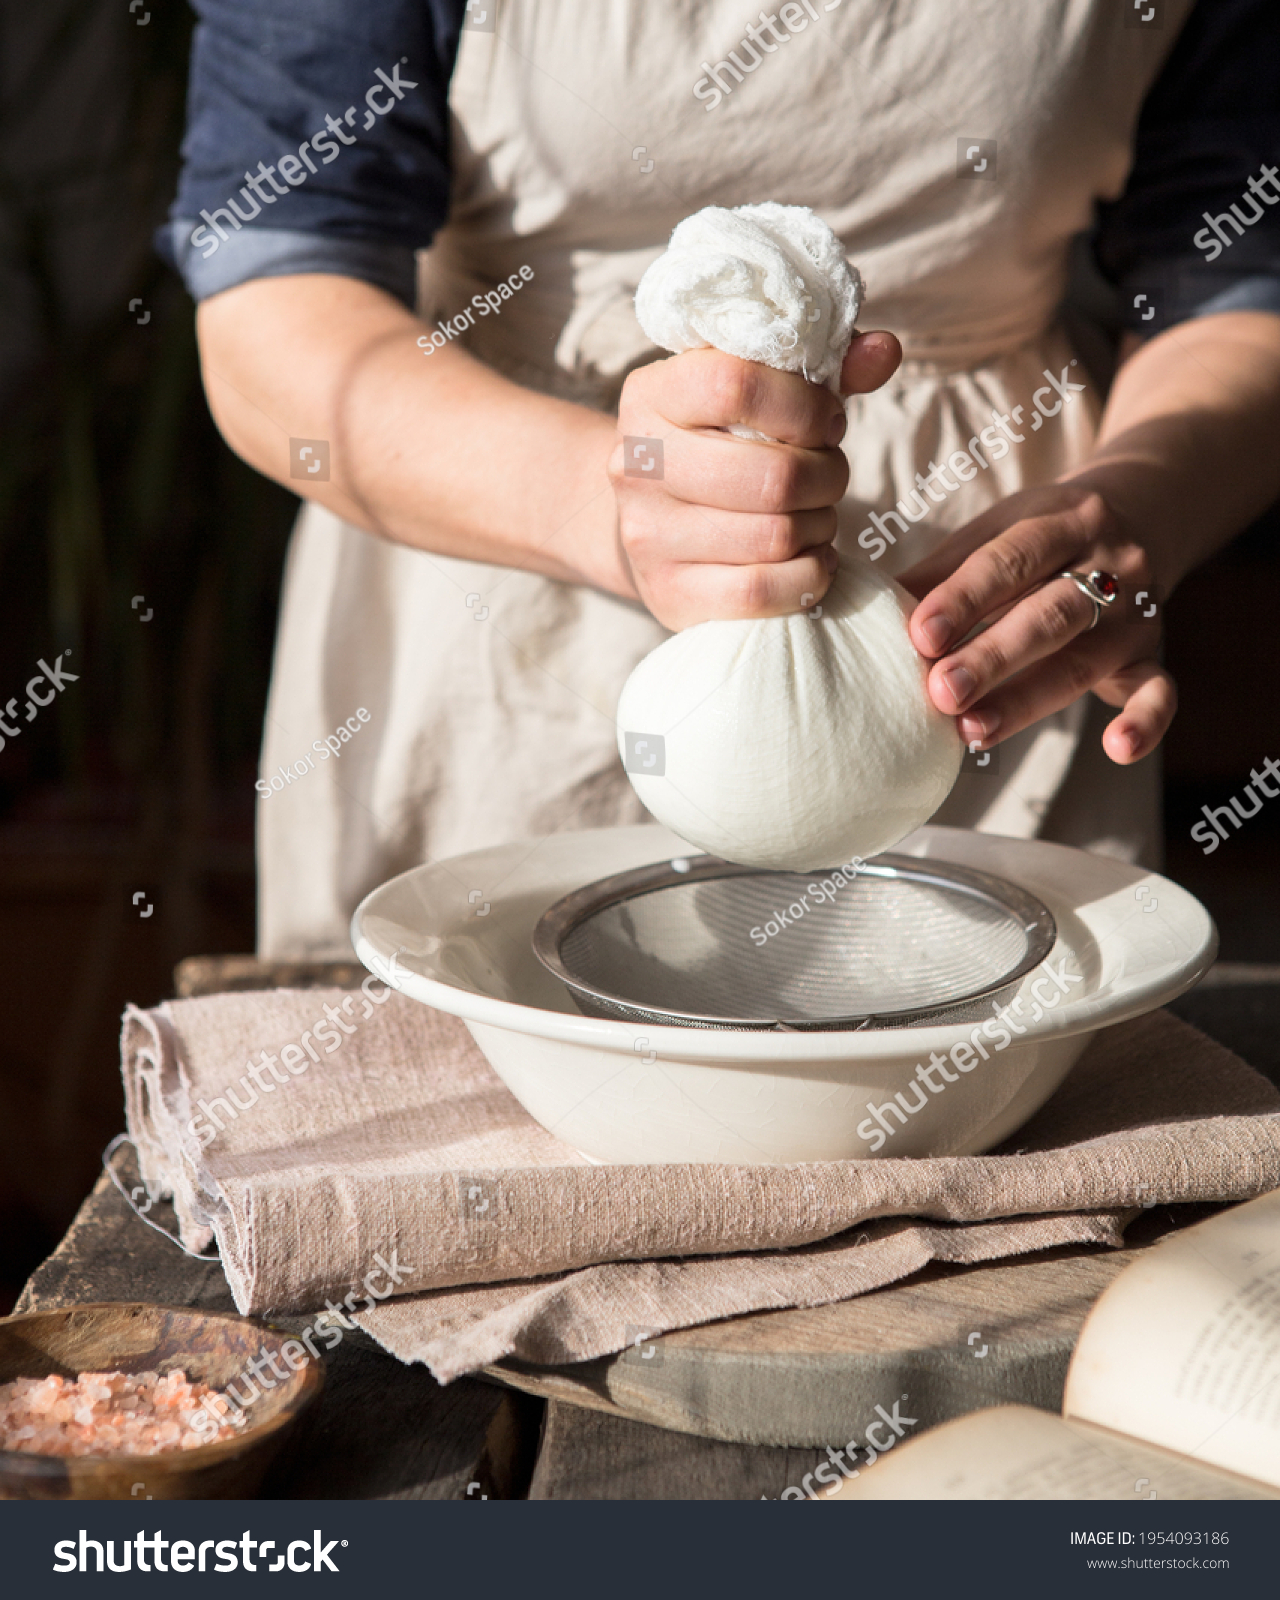 Preparation of almond milk - woman straining the milk through a cheesecloth #1954093186